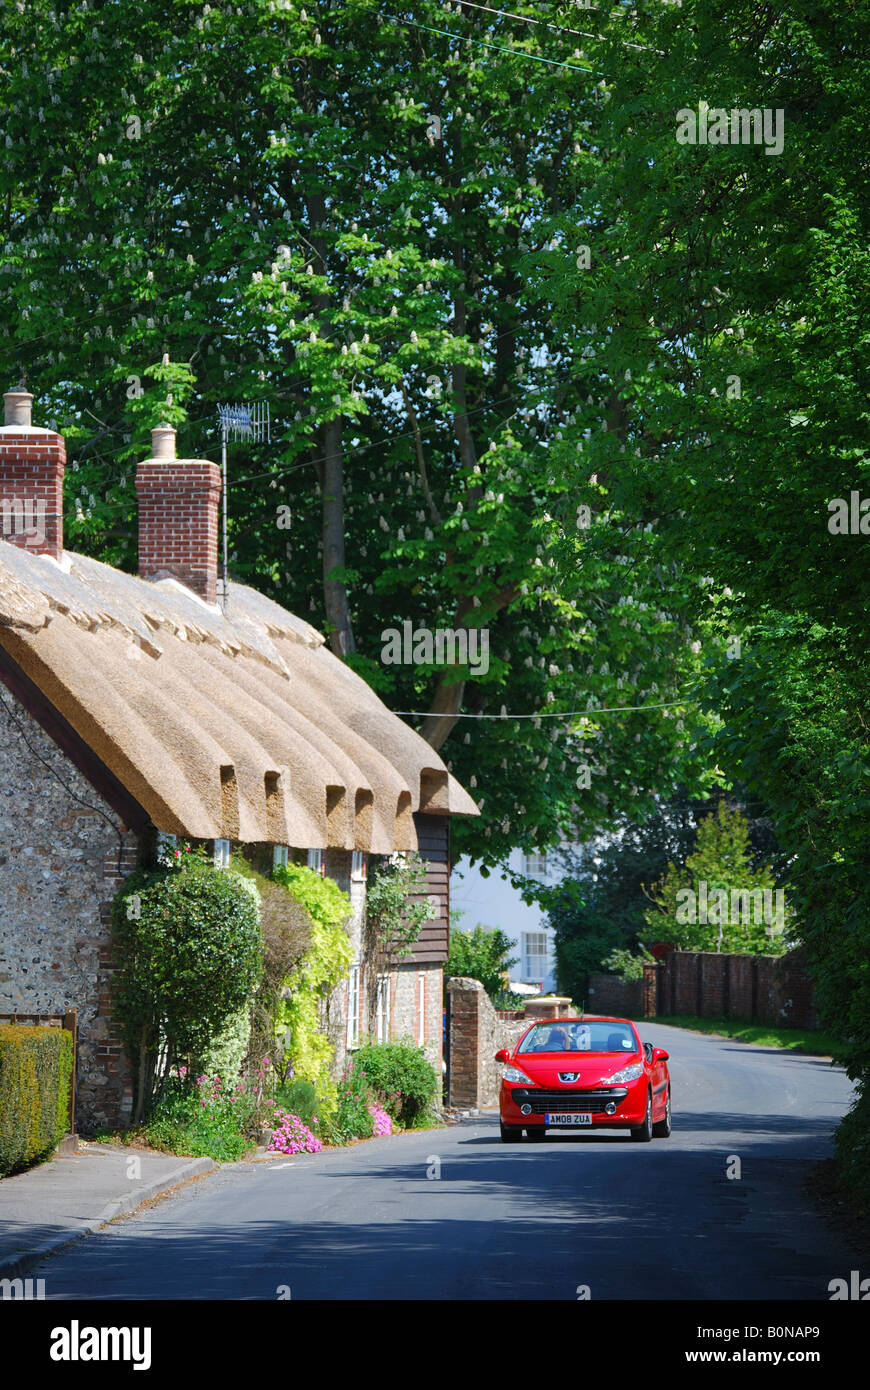 Convertible sports car on road, West Meon, Hampshire, England, United Kingdom Stock Photo